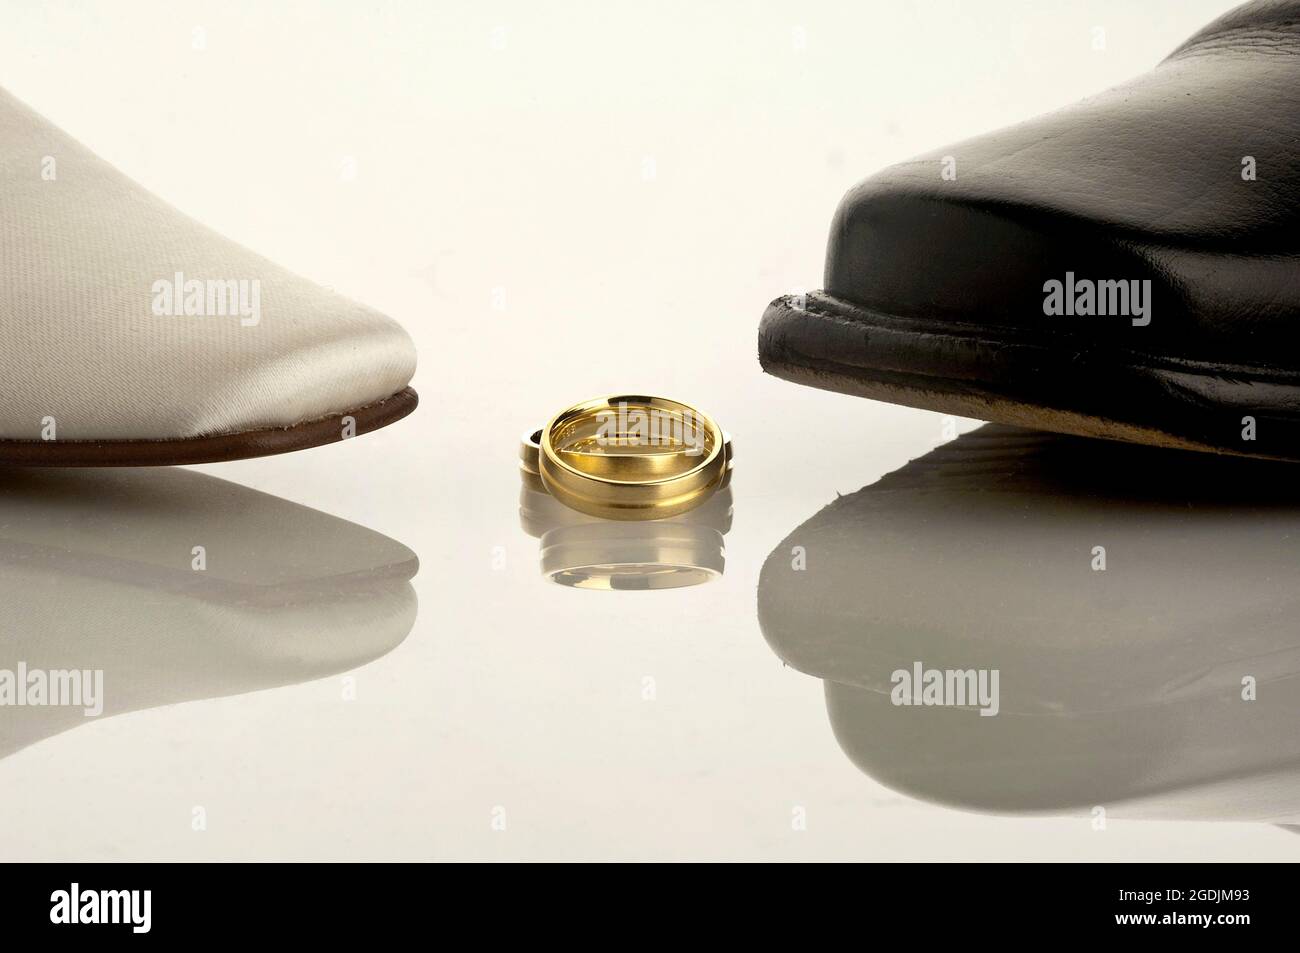 wedding shoes and golden wedding rings Stock Photo